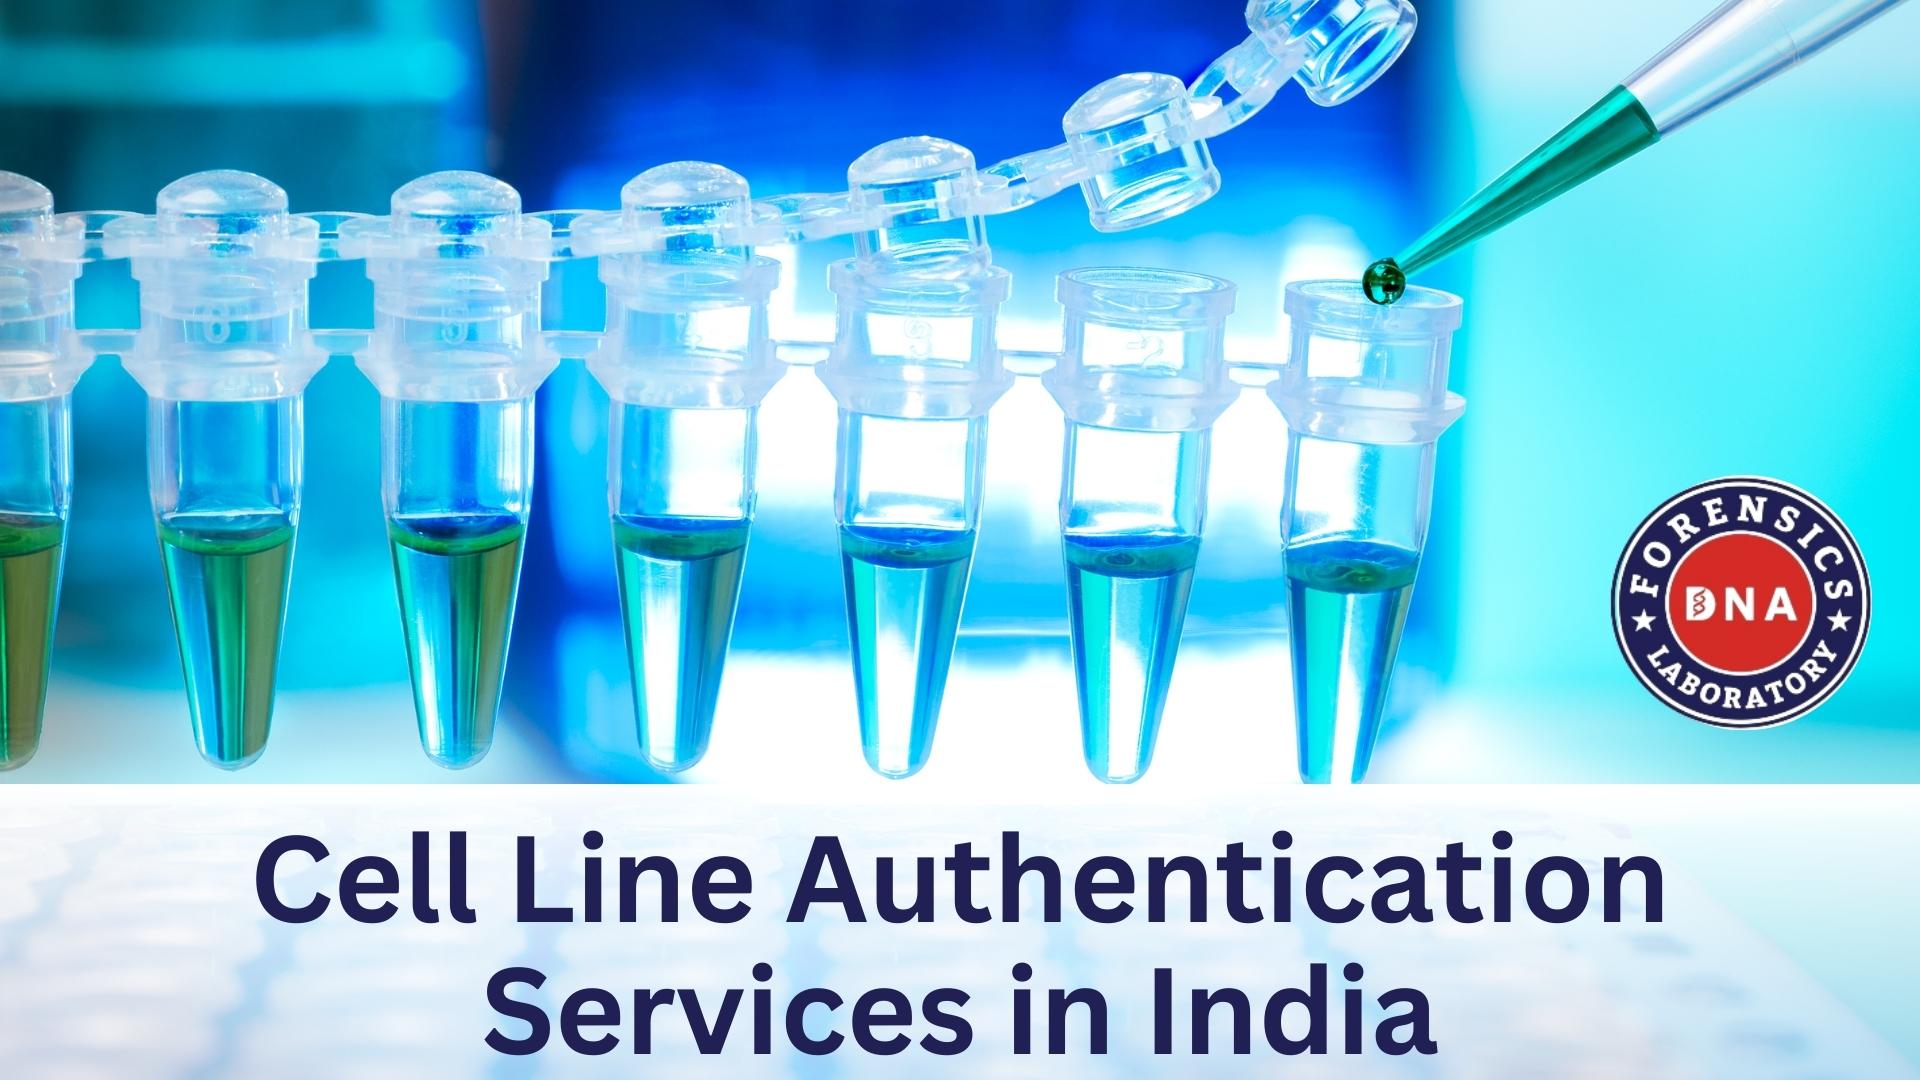 Advantages of Cell Line Authentication in Scientific Research – DNA Forensics Laboratory Pvt. Ltd.